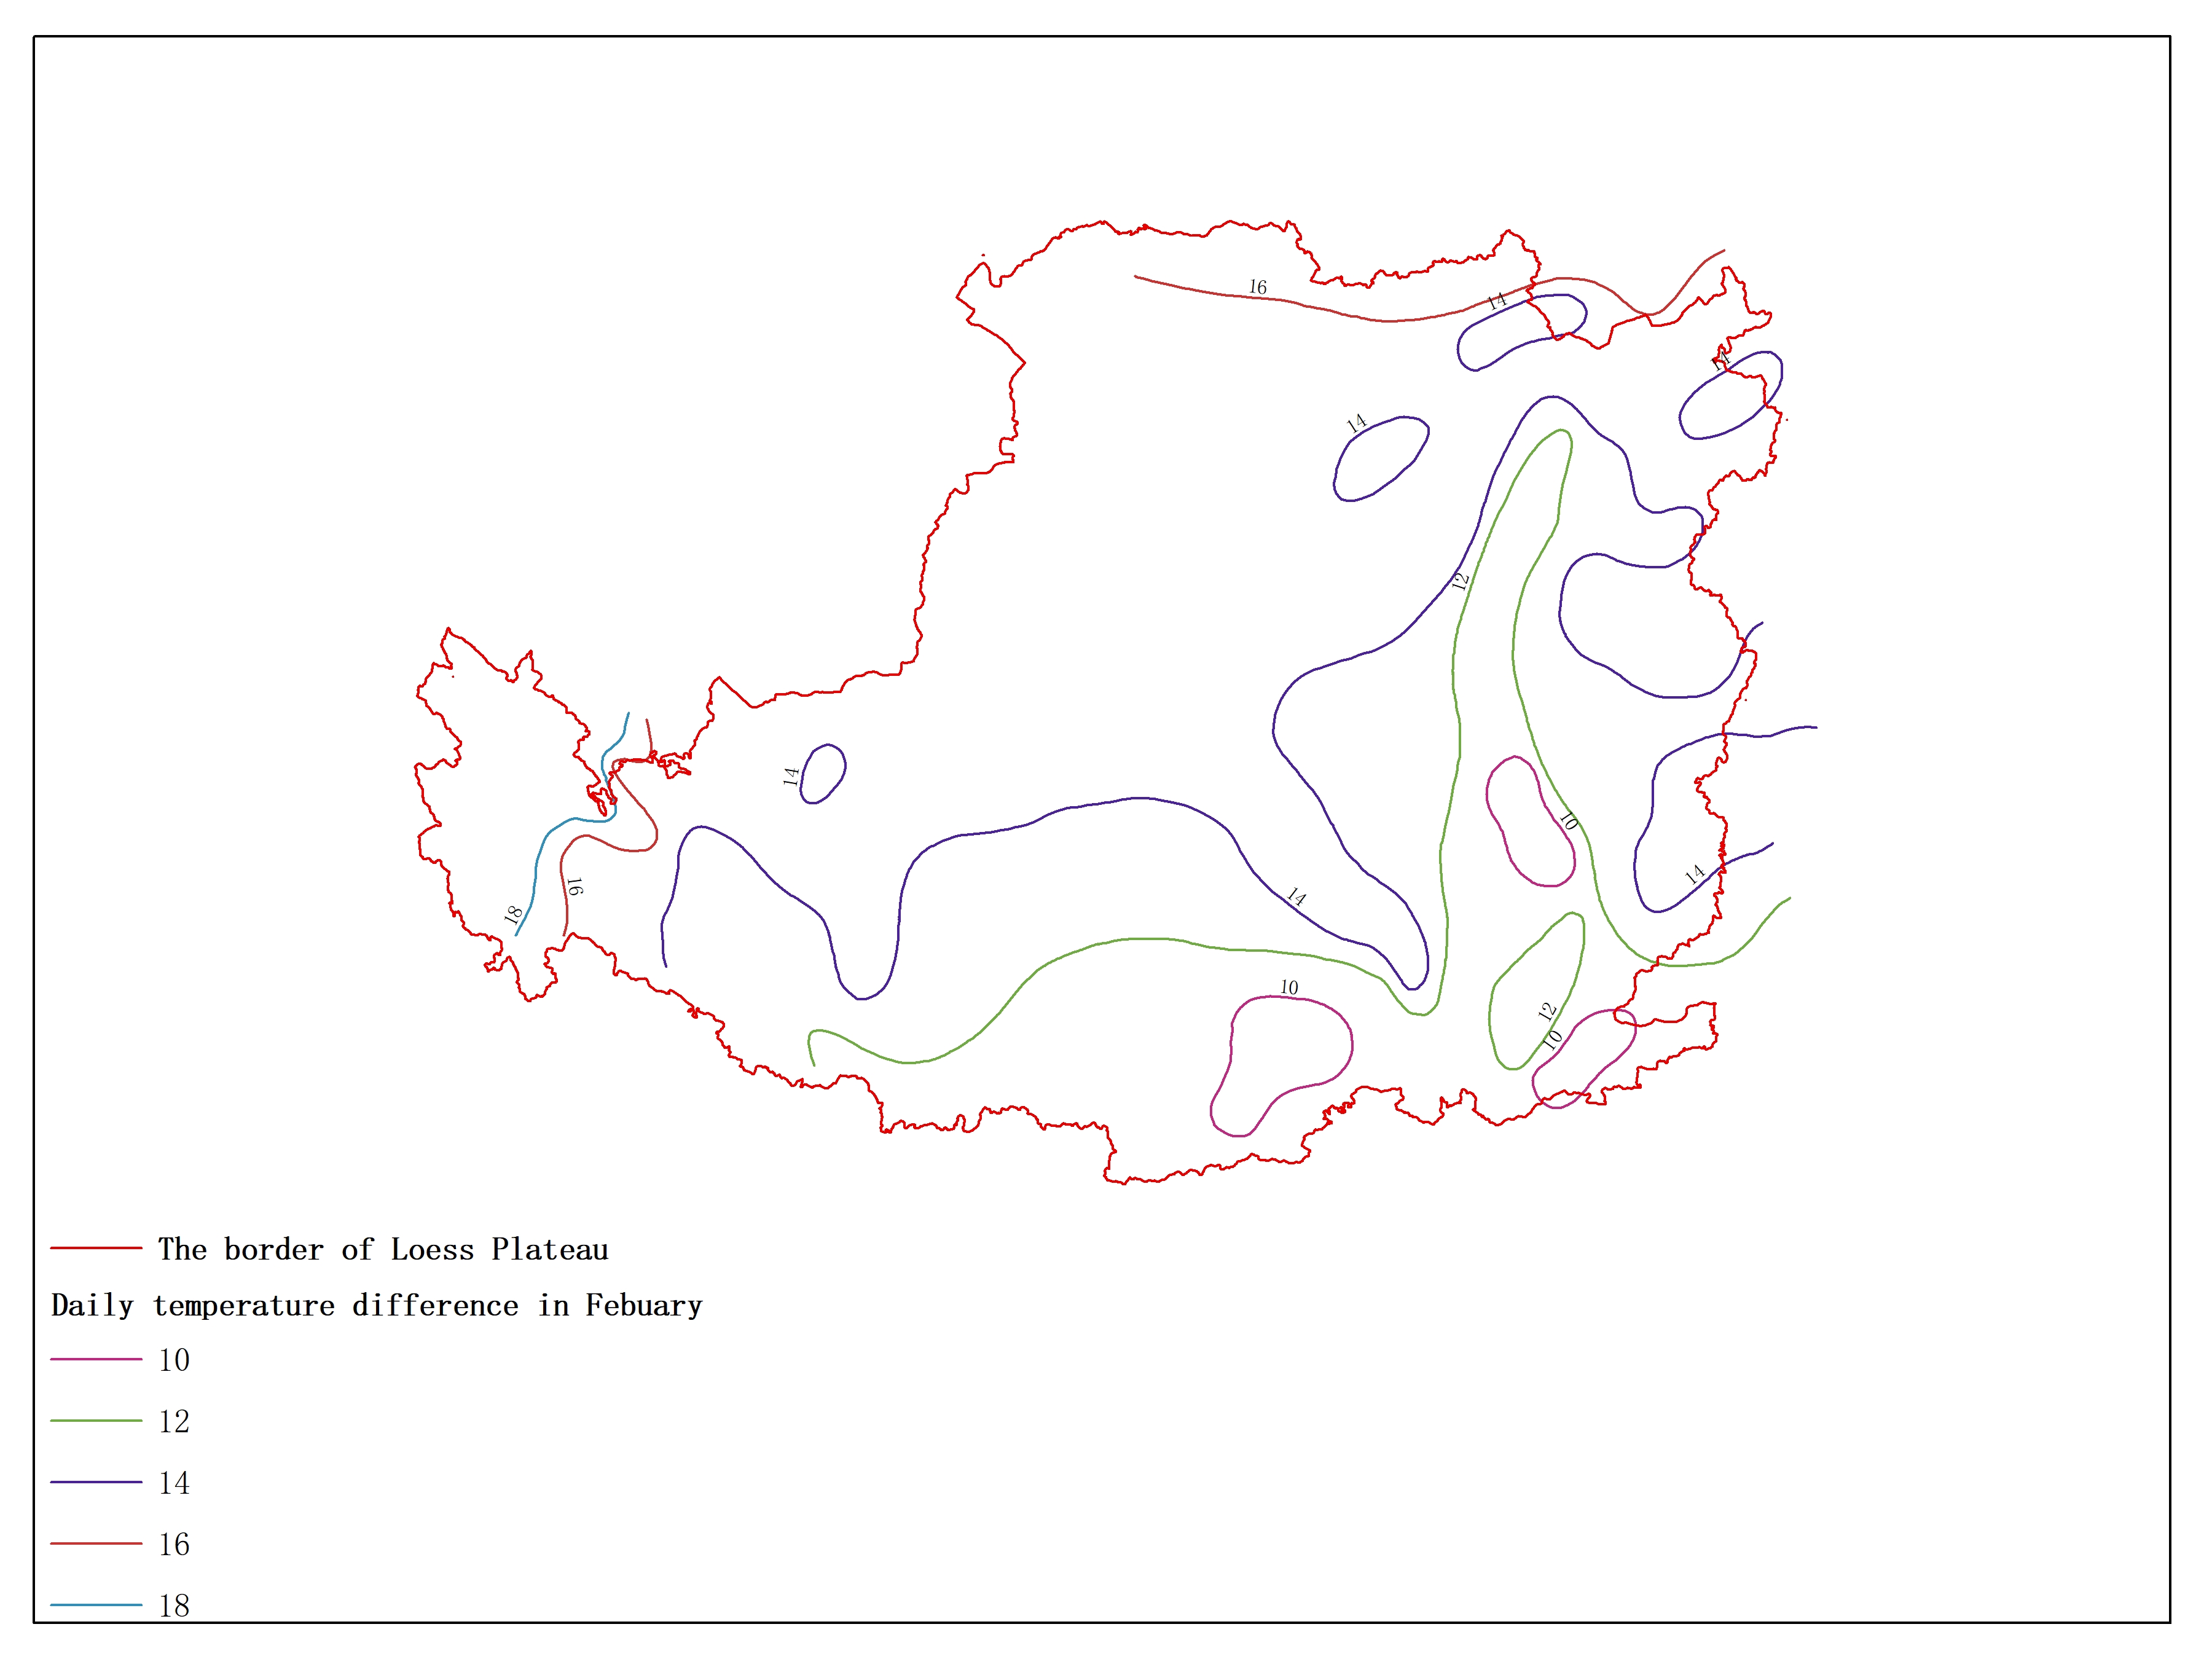 Agricultural climate resource atlas of Loess Plateau-Daily temperature difference in February